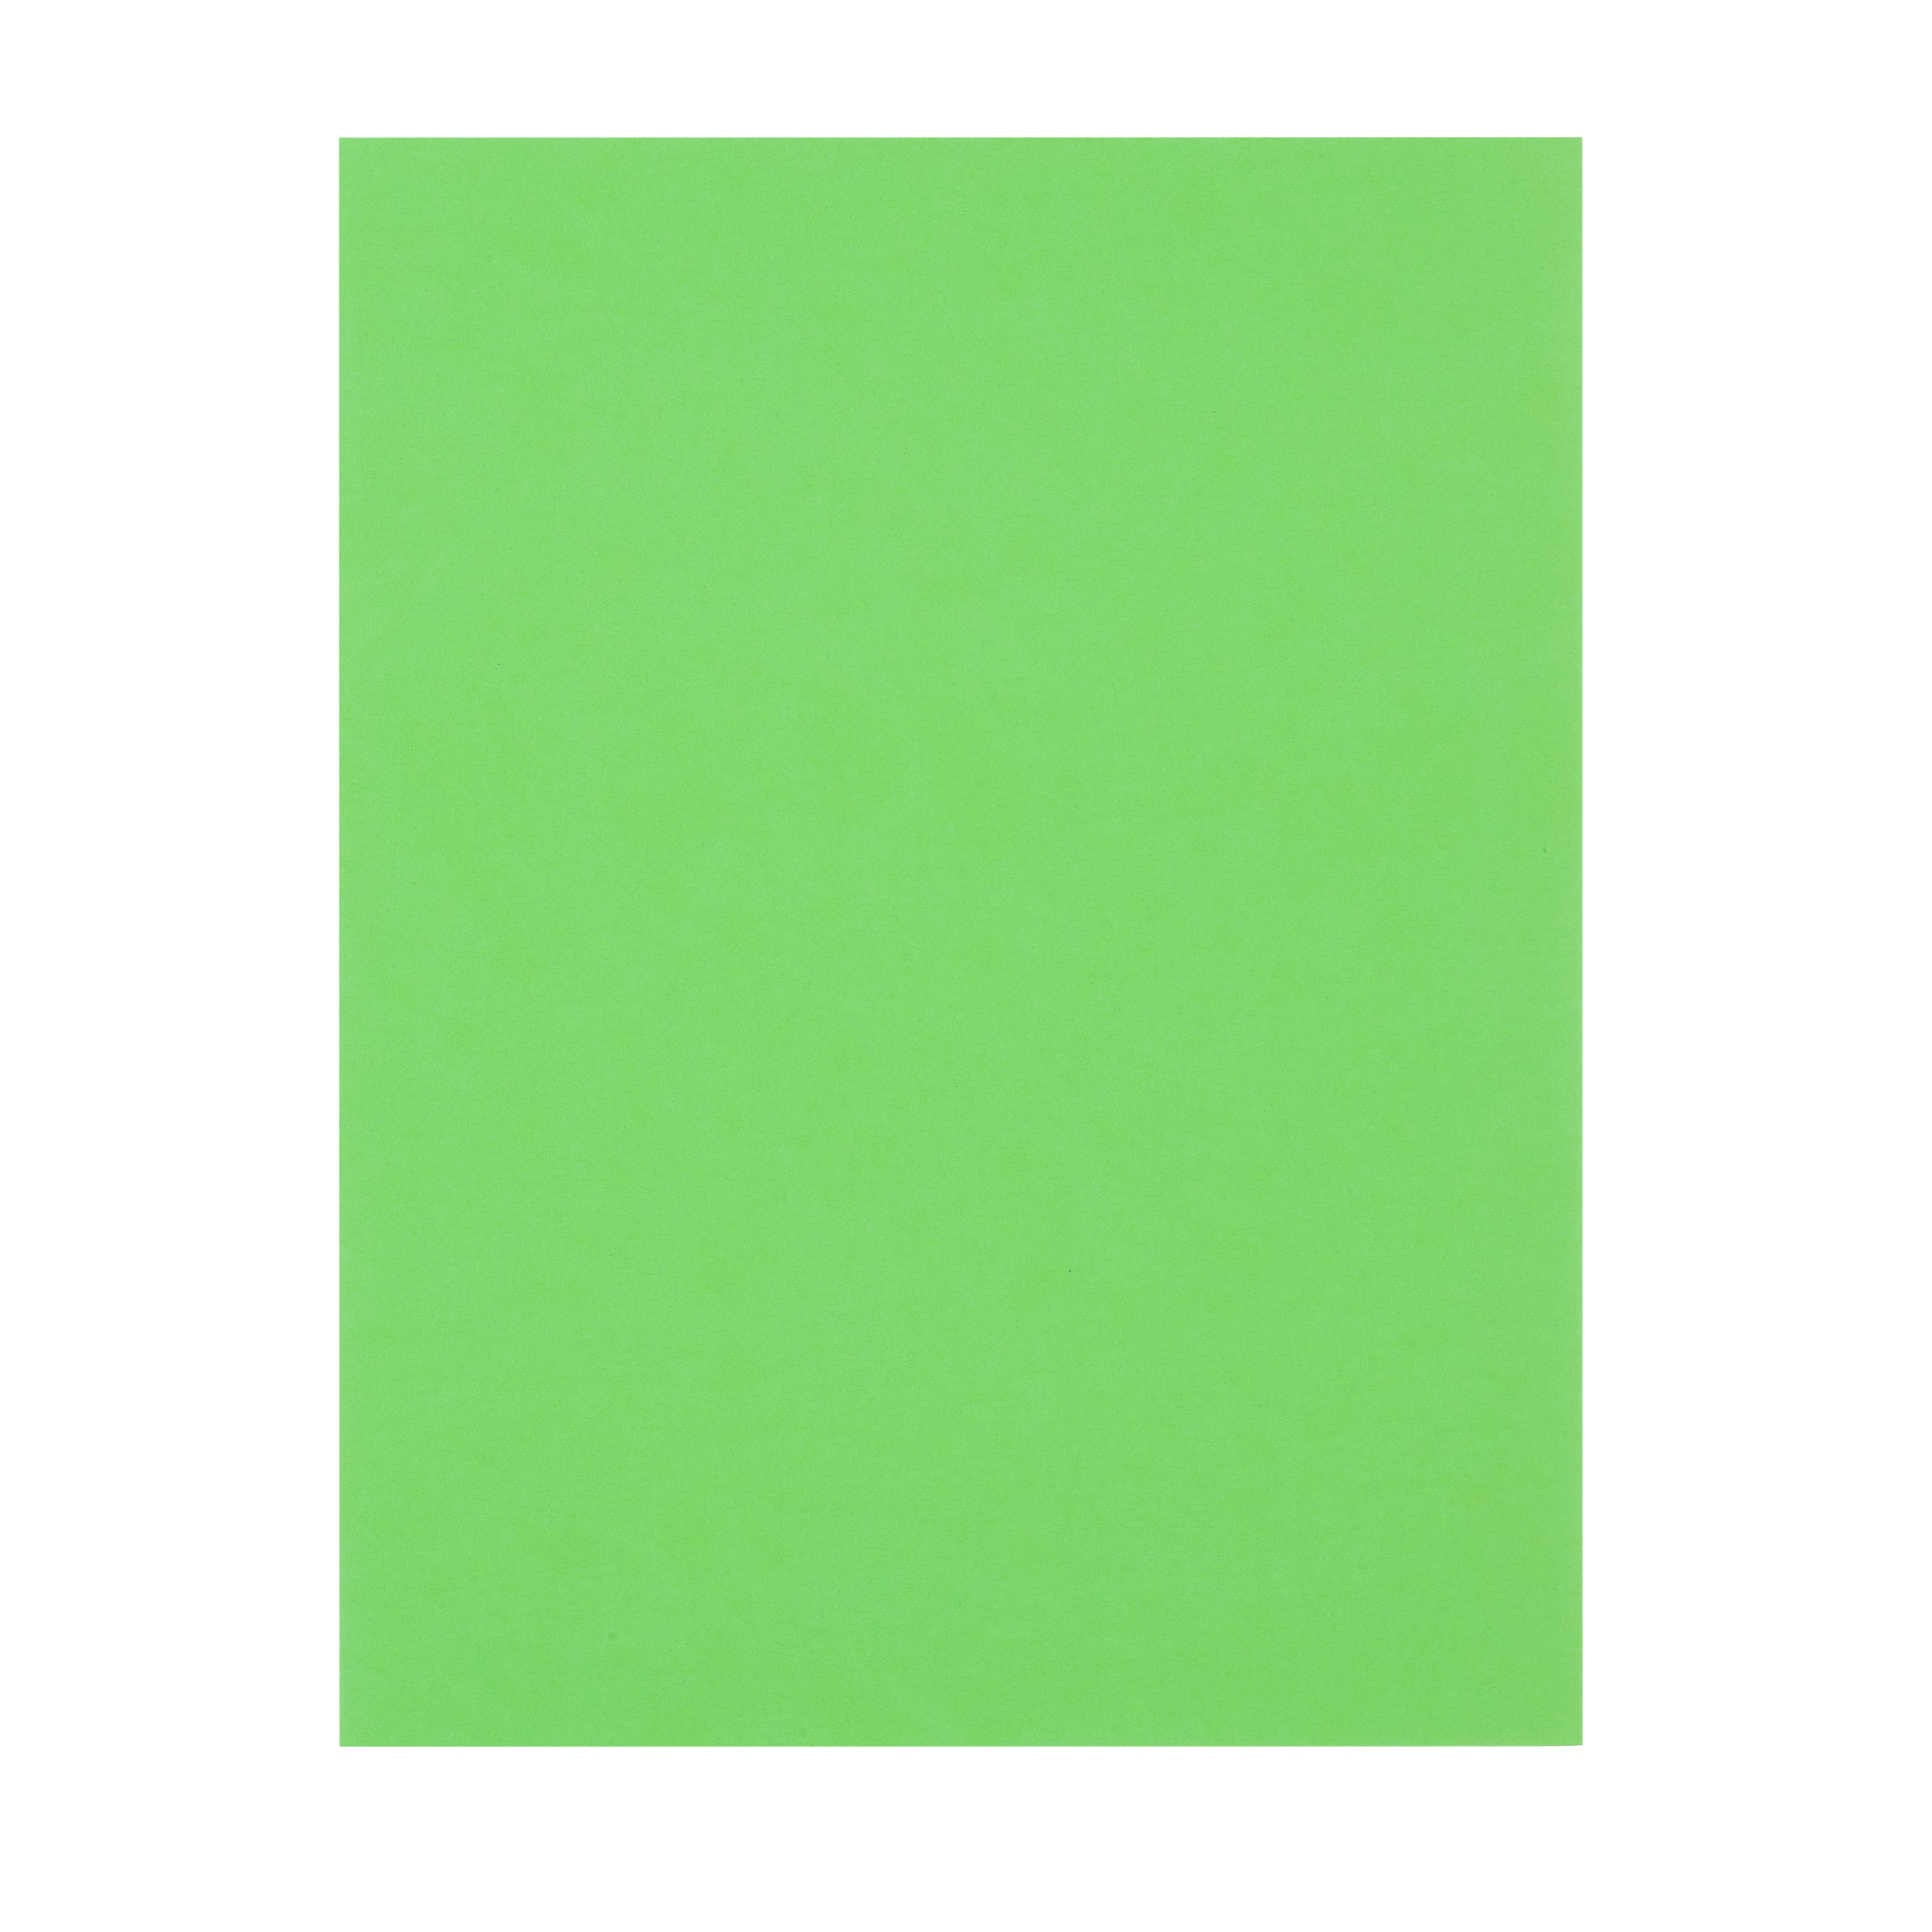 Garden Greens 8.5 x 11 Cardstock Paper by Recollections 100 Sheets | Michaels